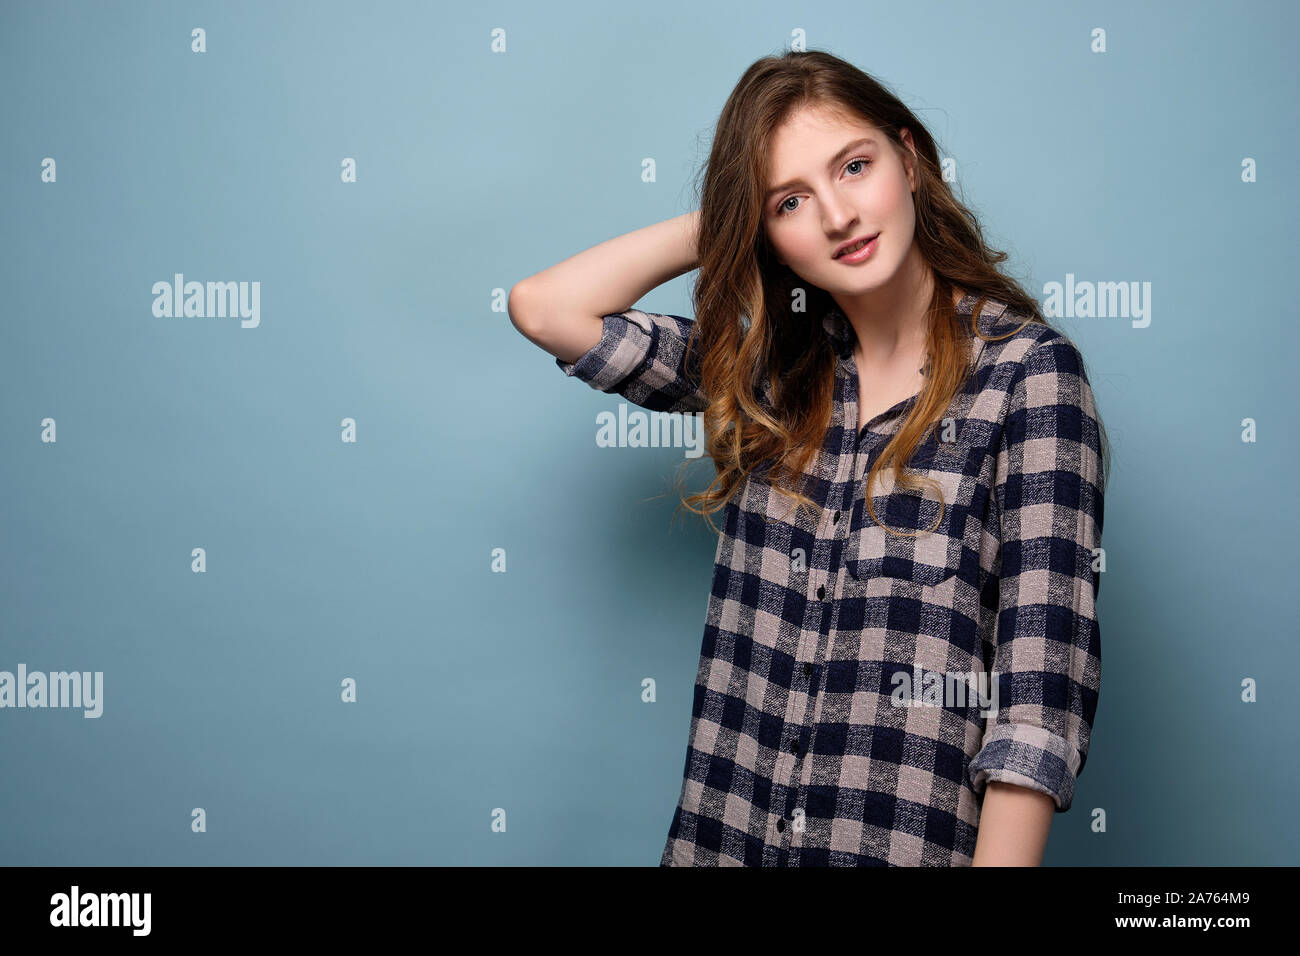 A young girl in a plaid shirt stands on a blue background and looks at the camera with her head bowed, her hand behind her head. Stock Photo